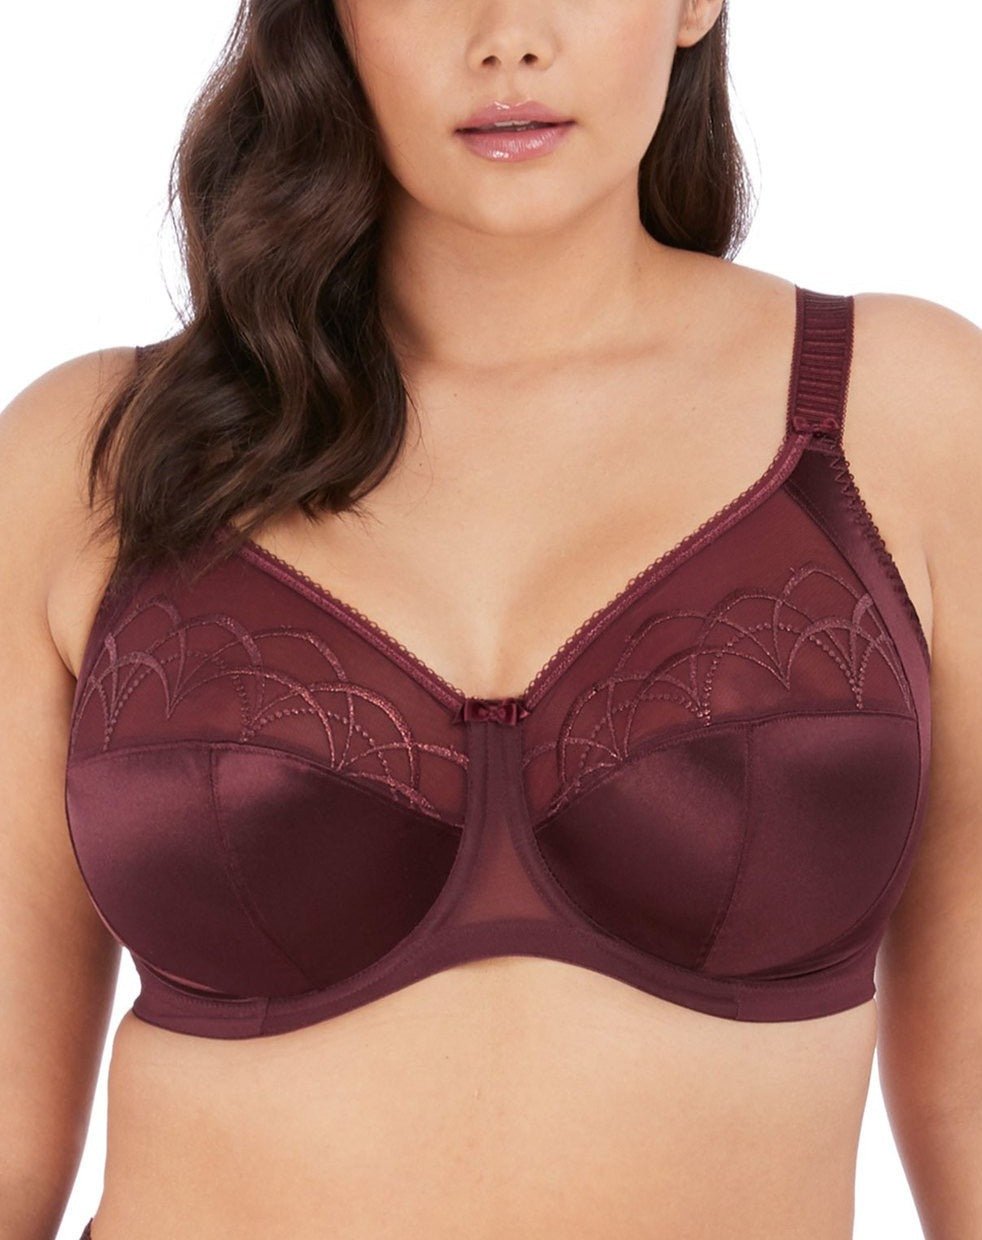 Susan's Disney Family: Curvation, full figure bras the really support you!  #Giveaway